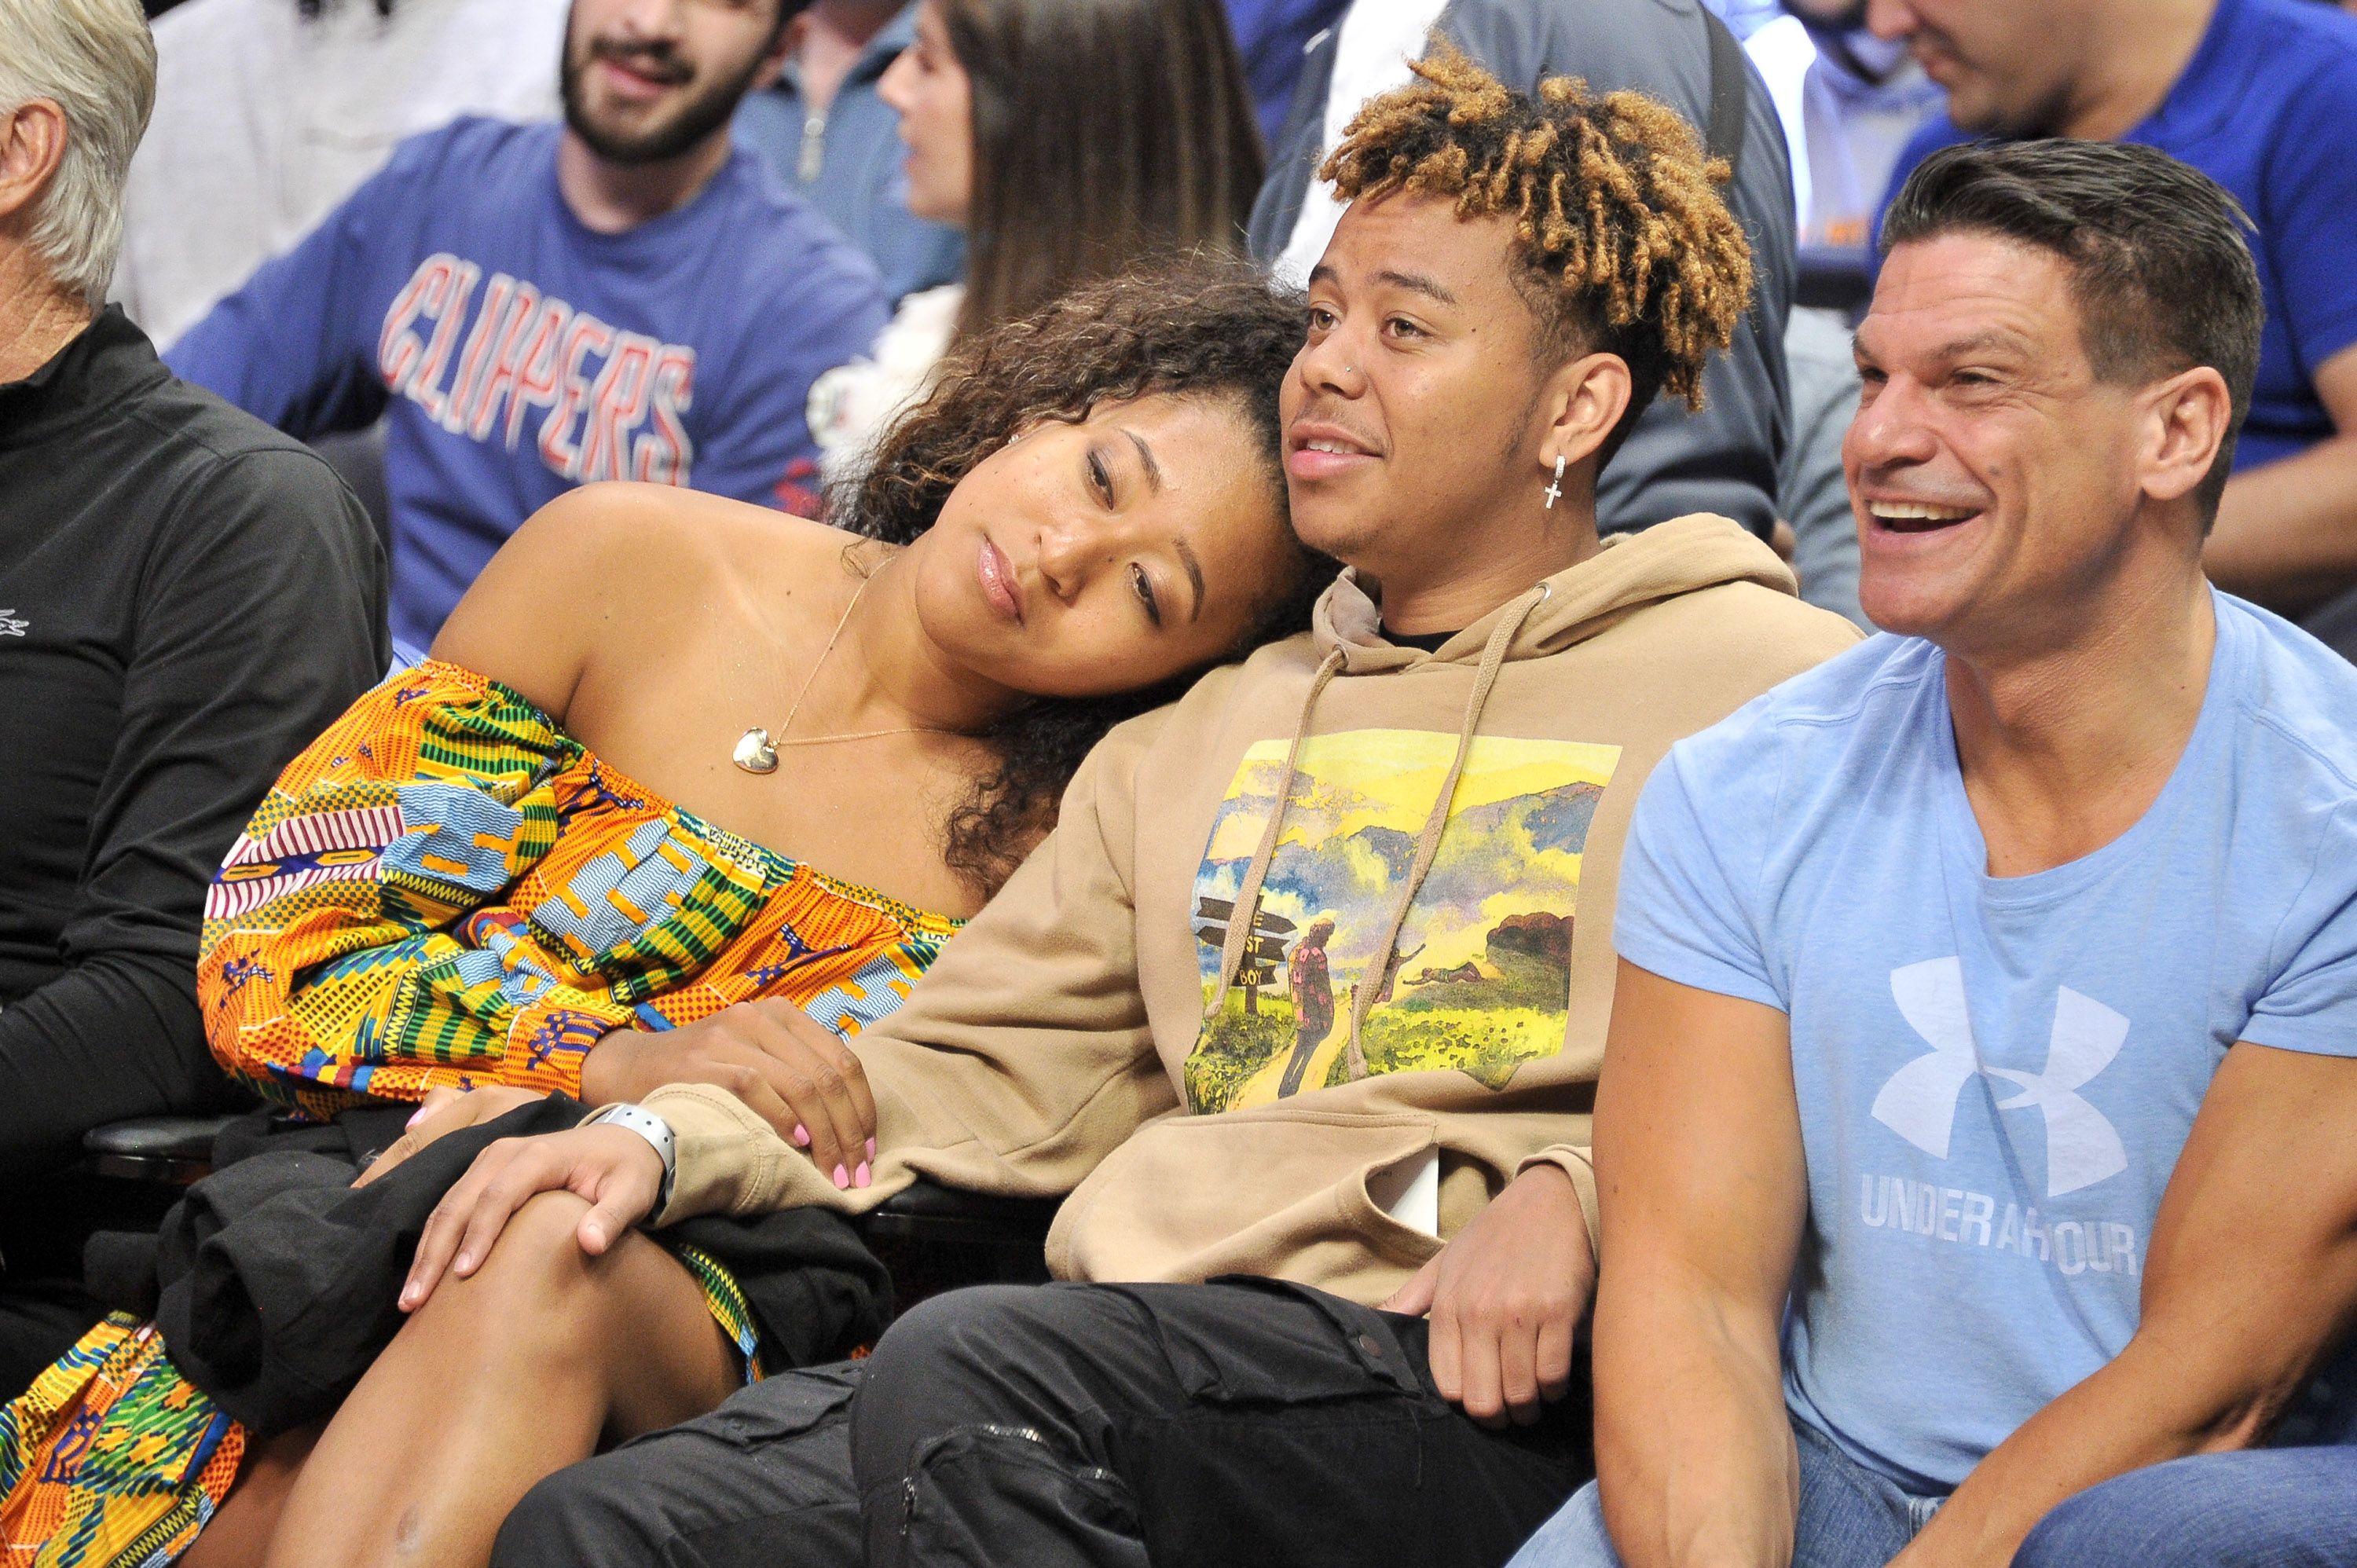 Who Is Cordae? - Meet Naomi Osaka's Boyfriend and Baby's Father